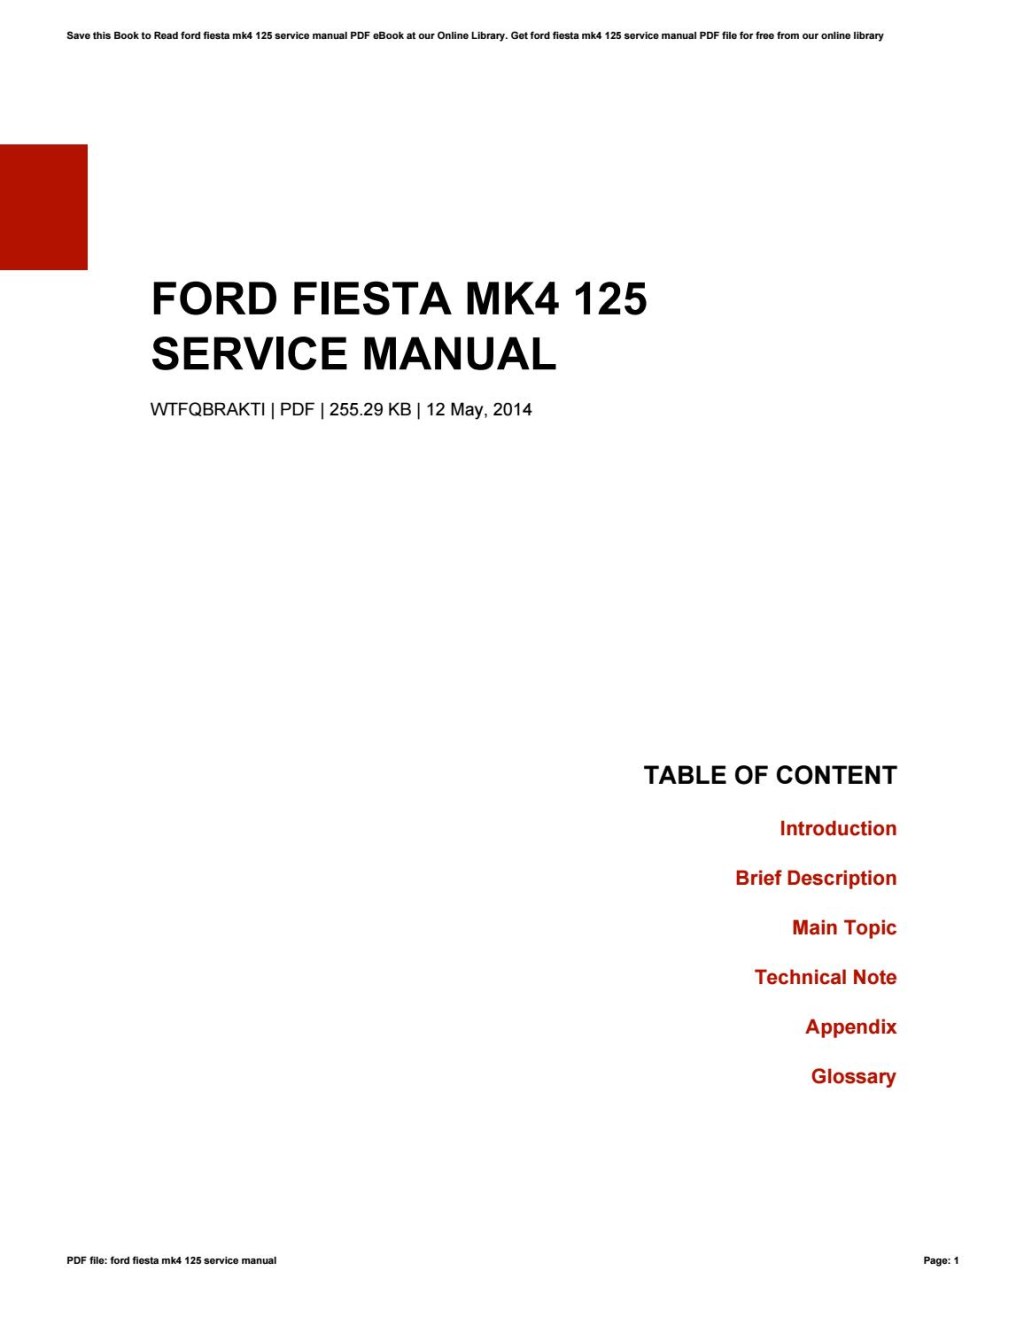 Picture of: Ford fiesta mk  service manual by RobertHayes – Issuu